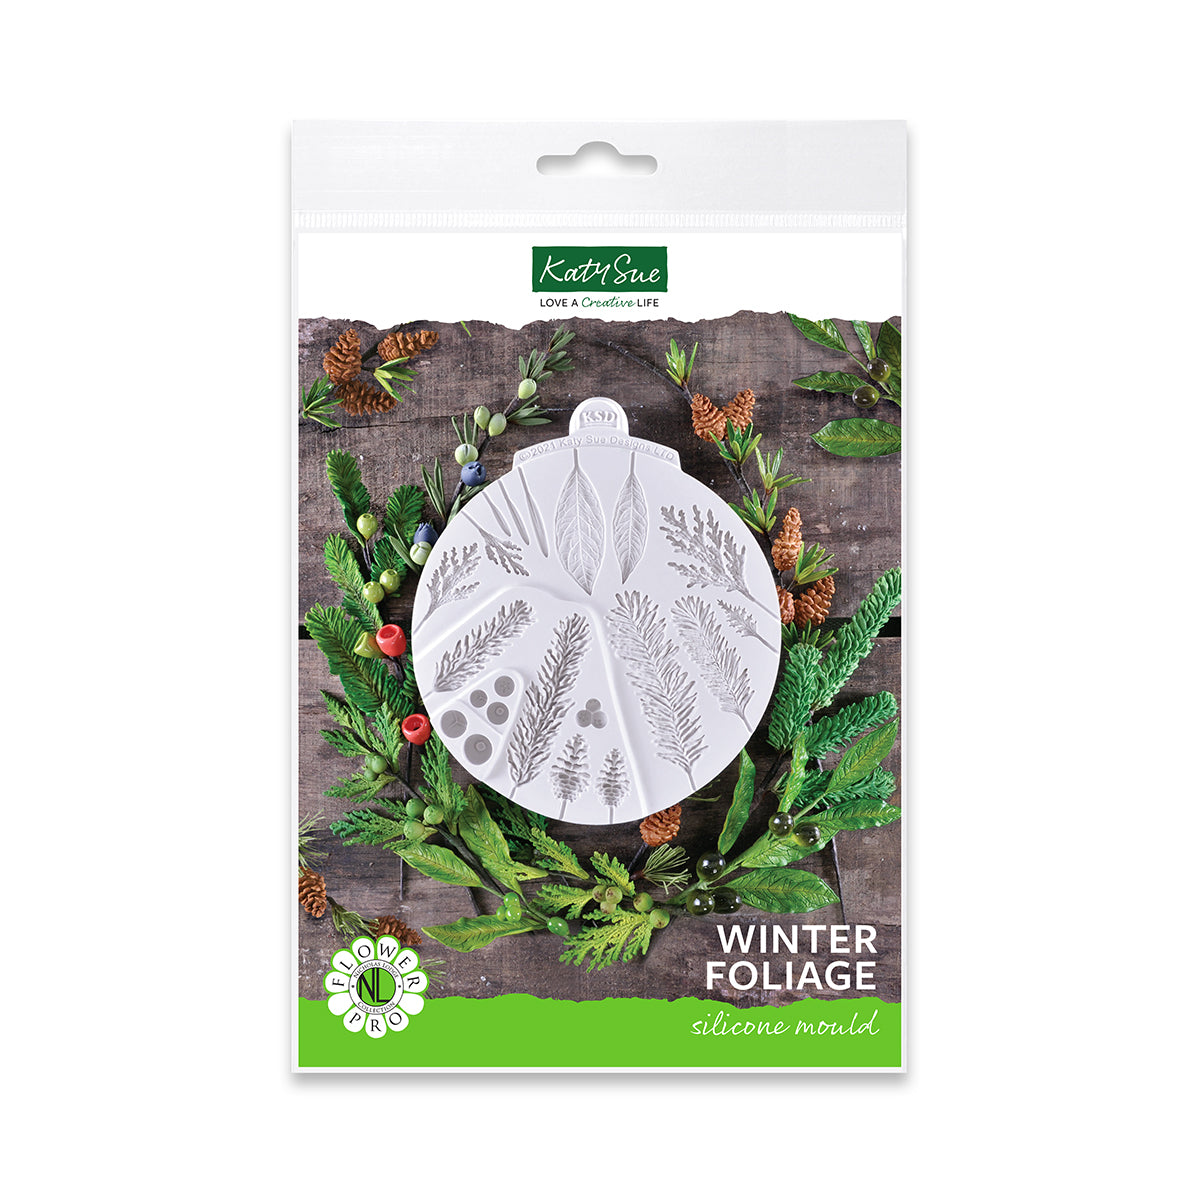 C&D - Flower Pro Winter Foliage Silicone Mould